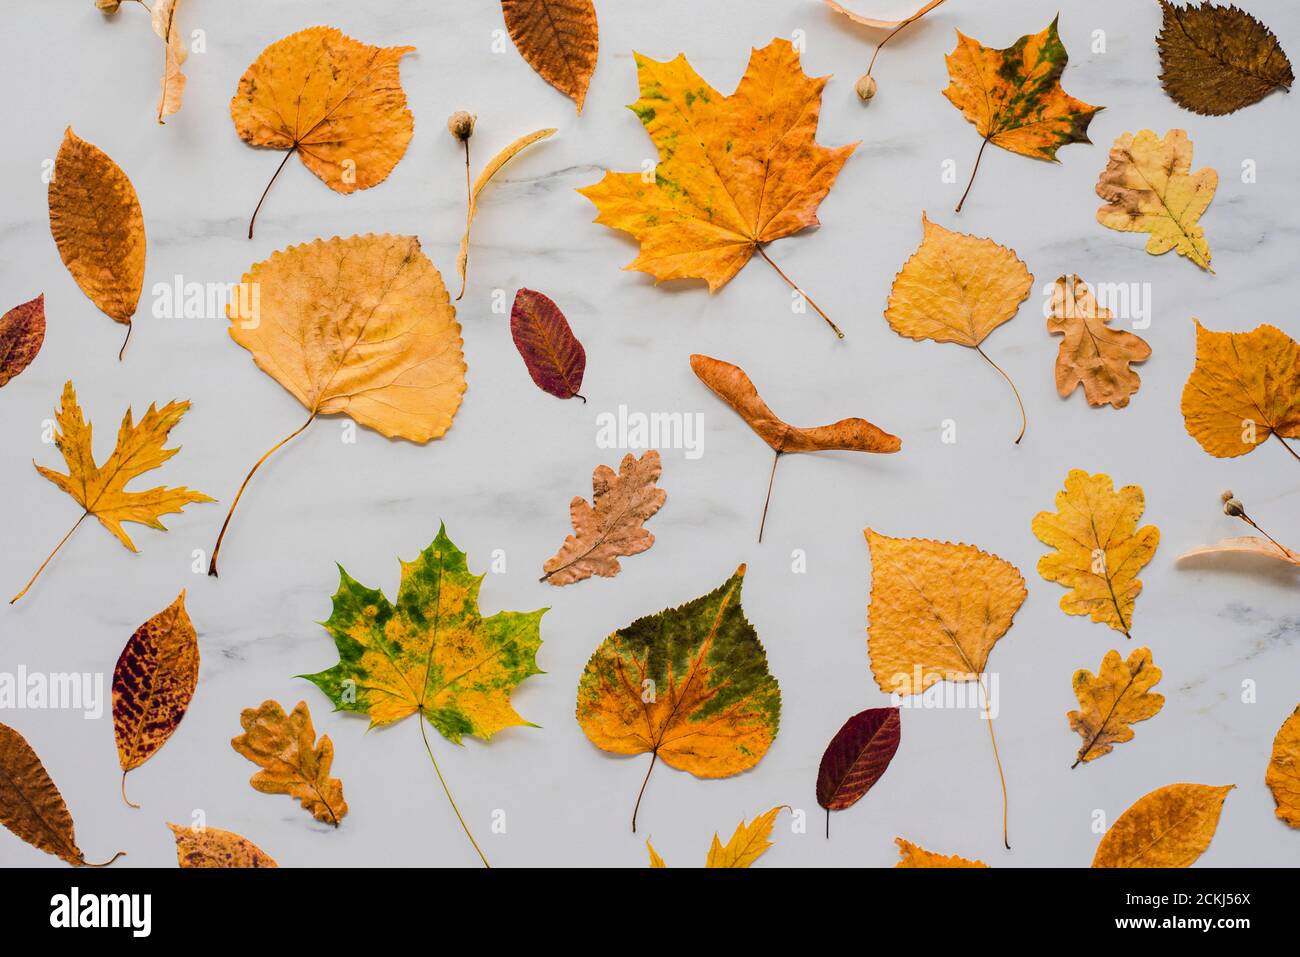 Colorful dry Autumn leaves on marble background. Flat lay, top view Stock Photo